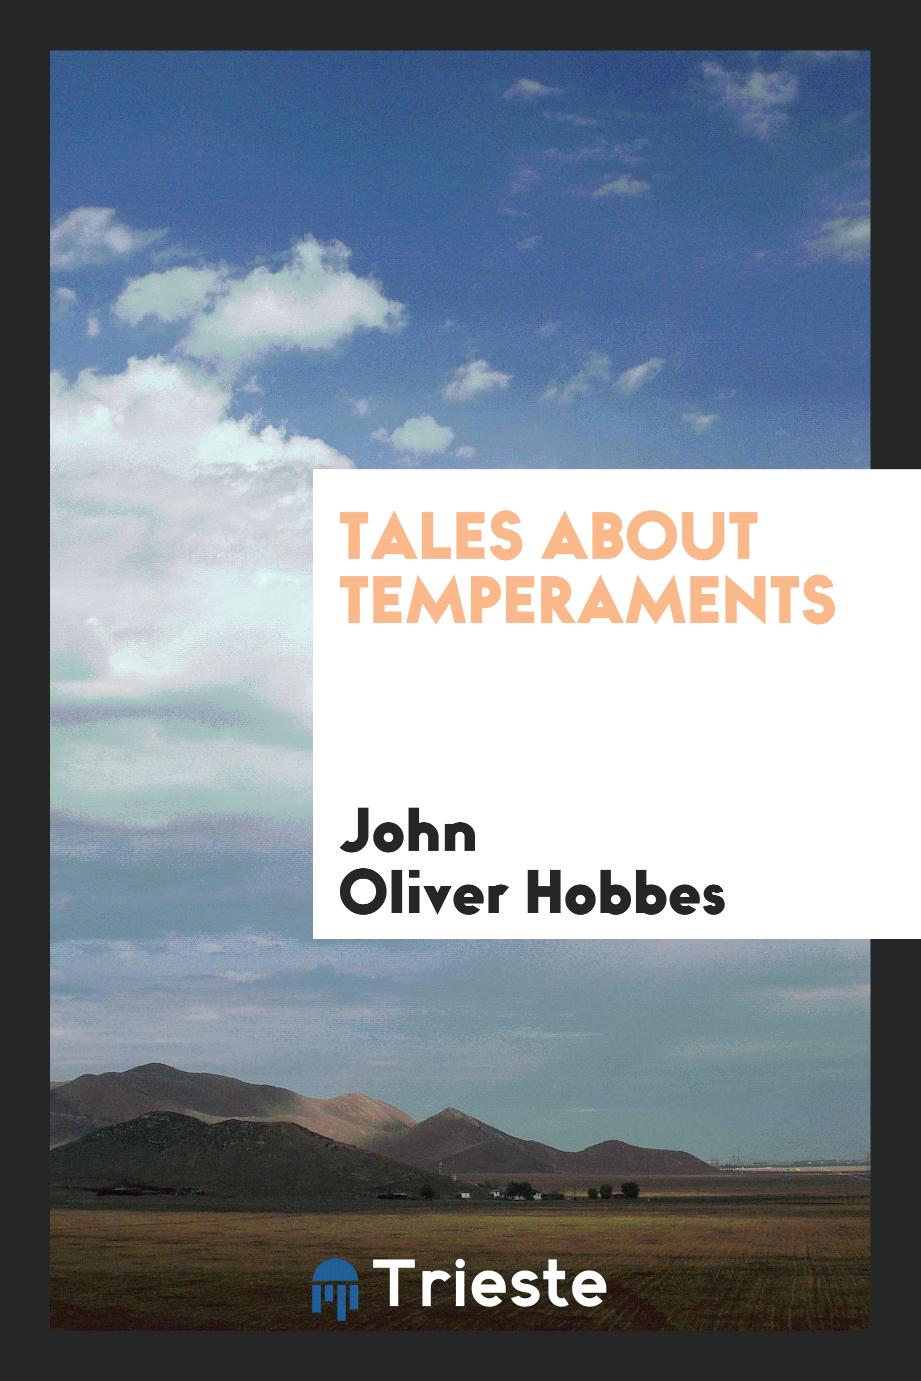 Tales About Temperaments